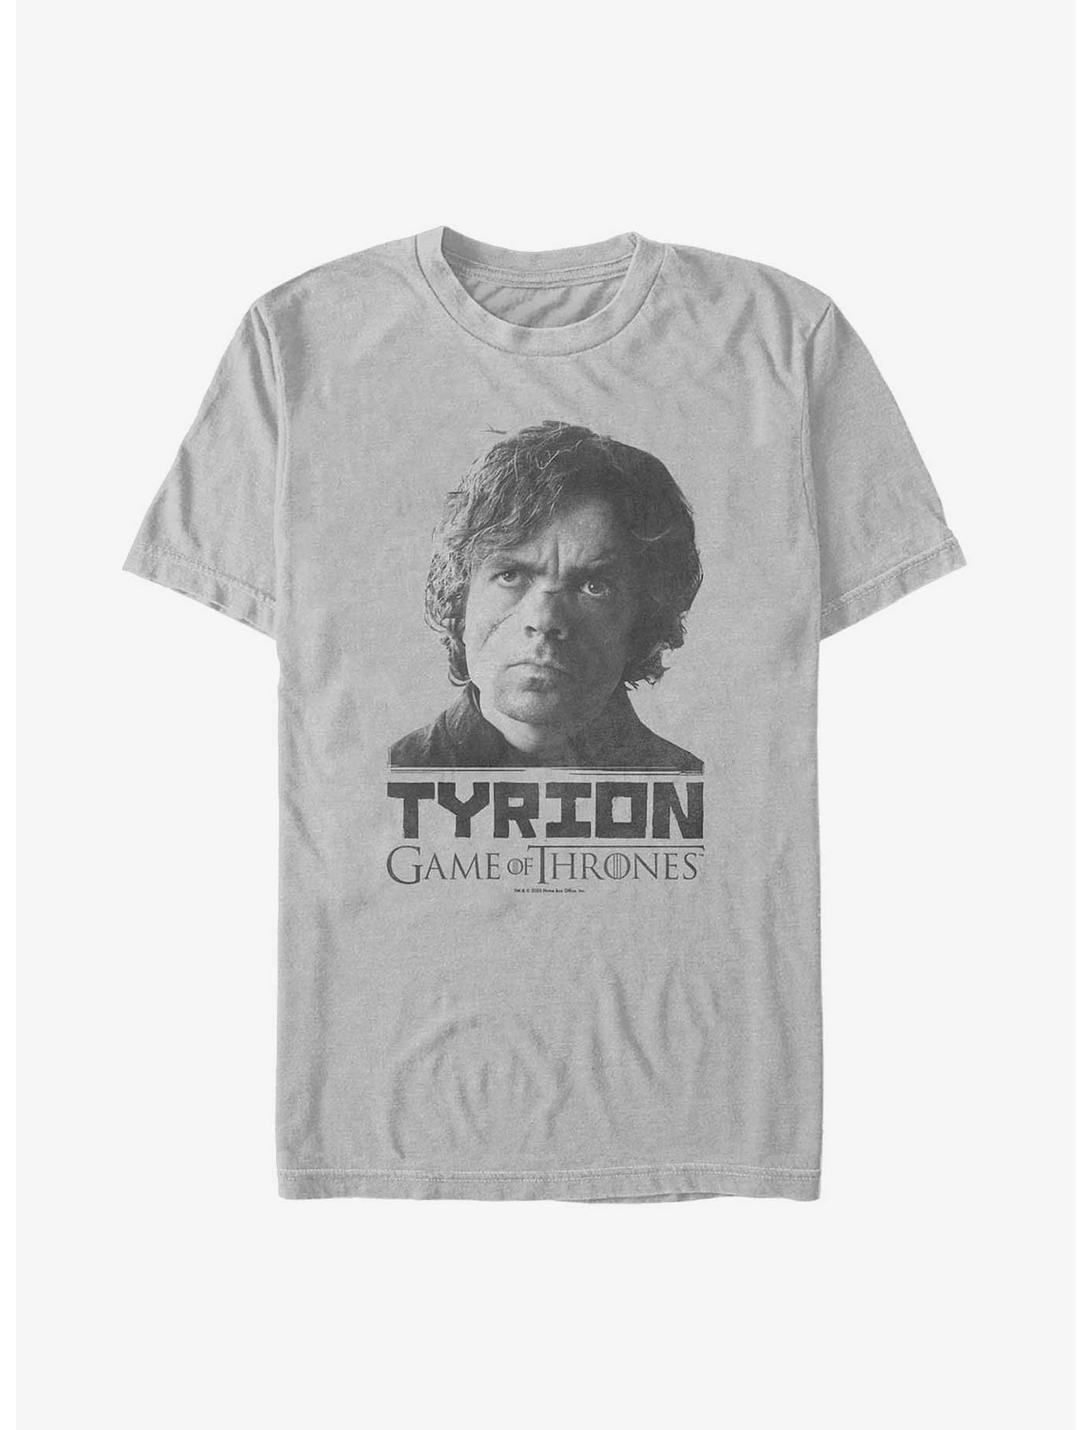 Game Of Thrones Tyrion Lannister T-Shirt, SILVER, hi-res